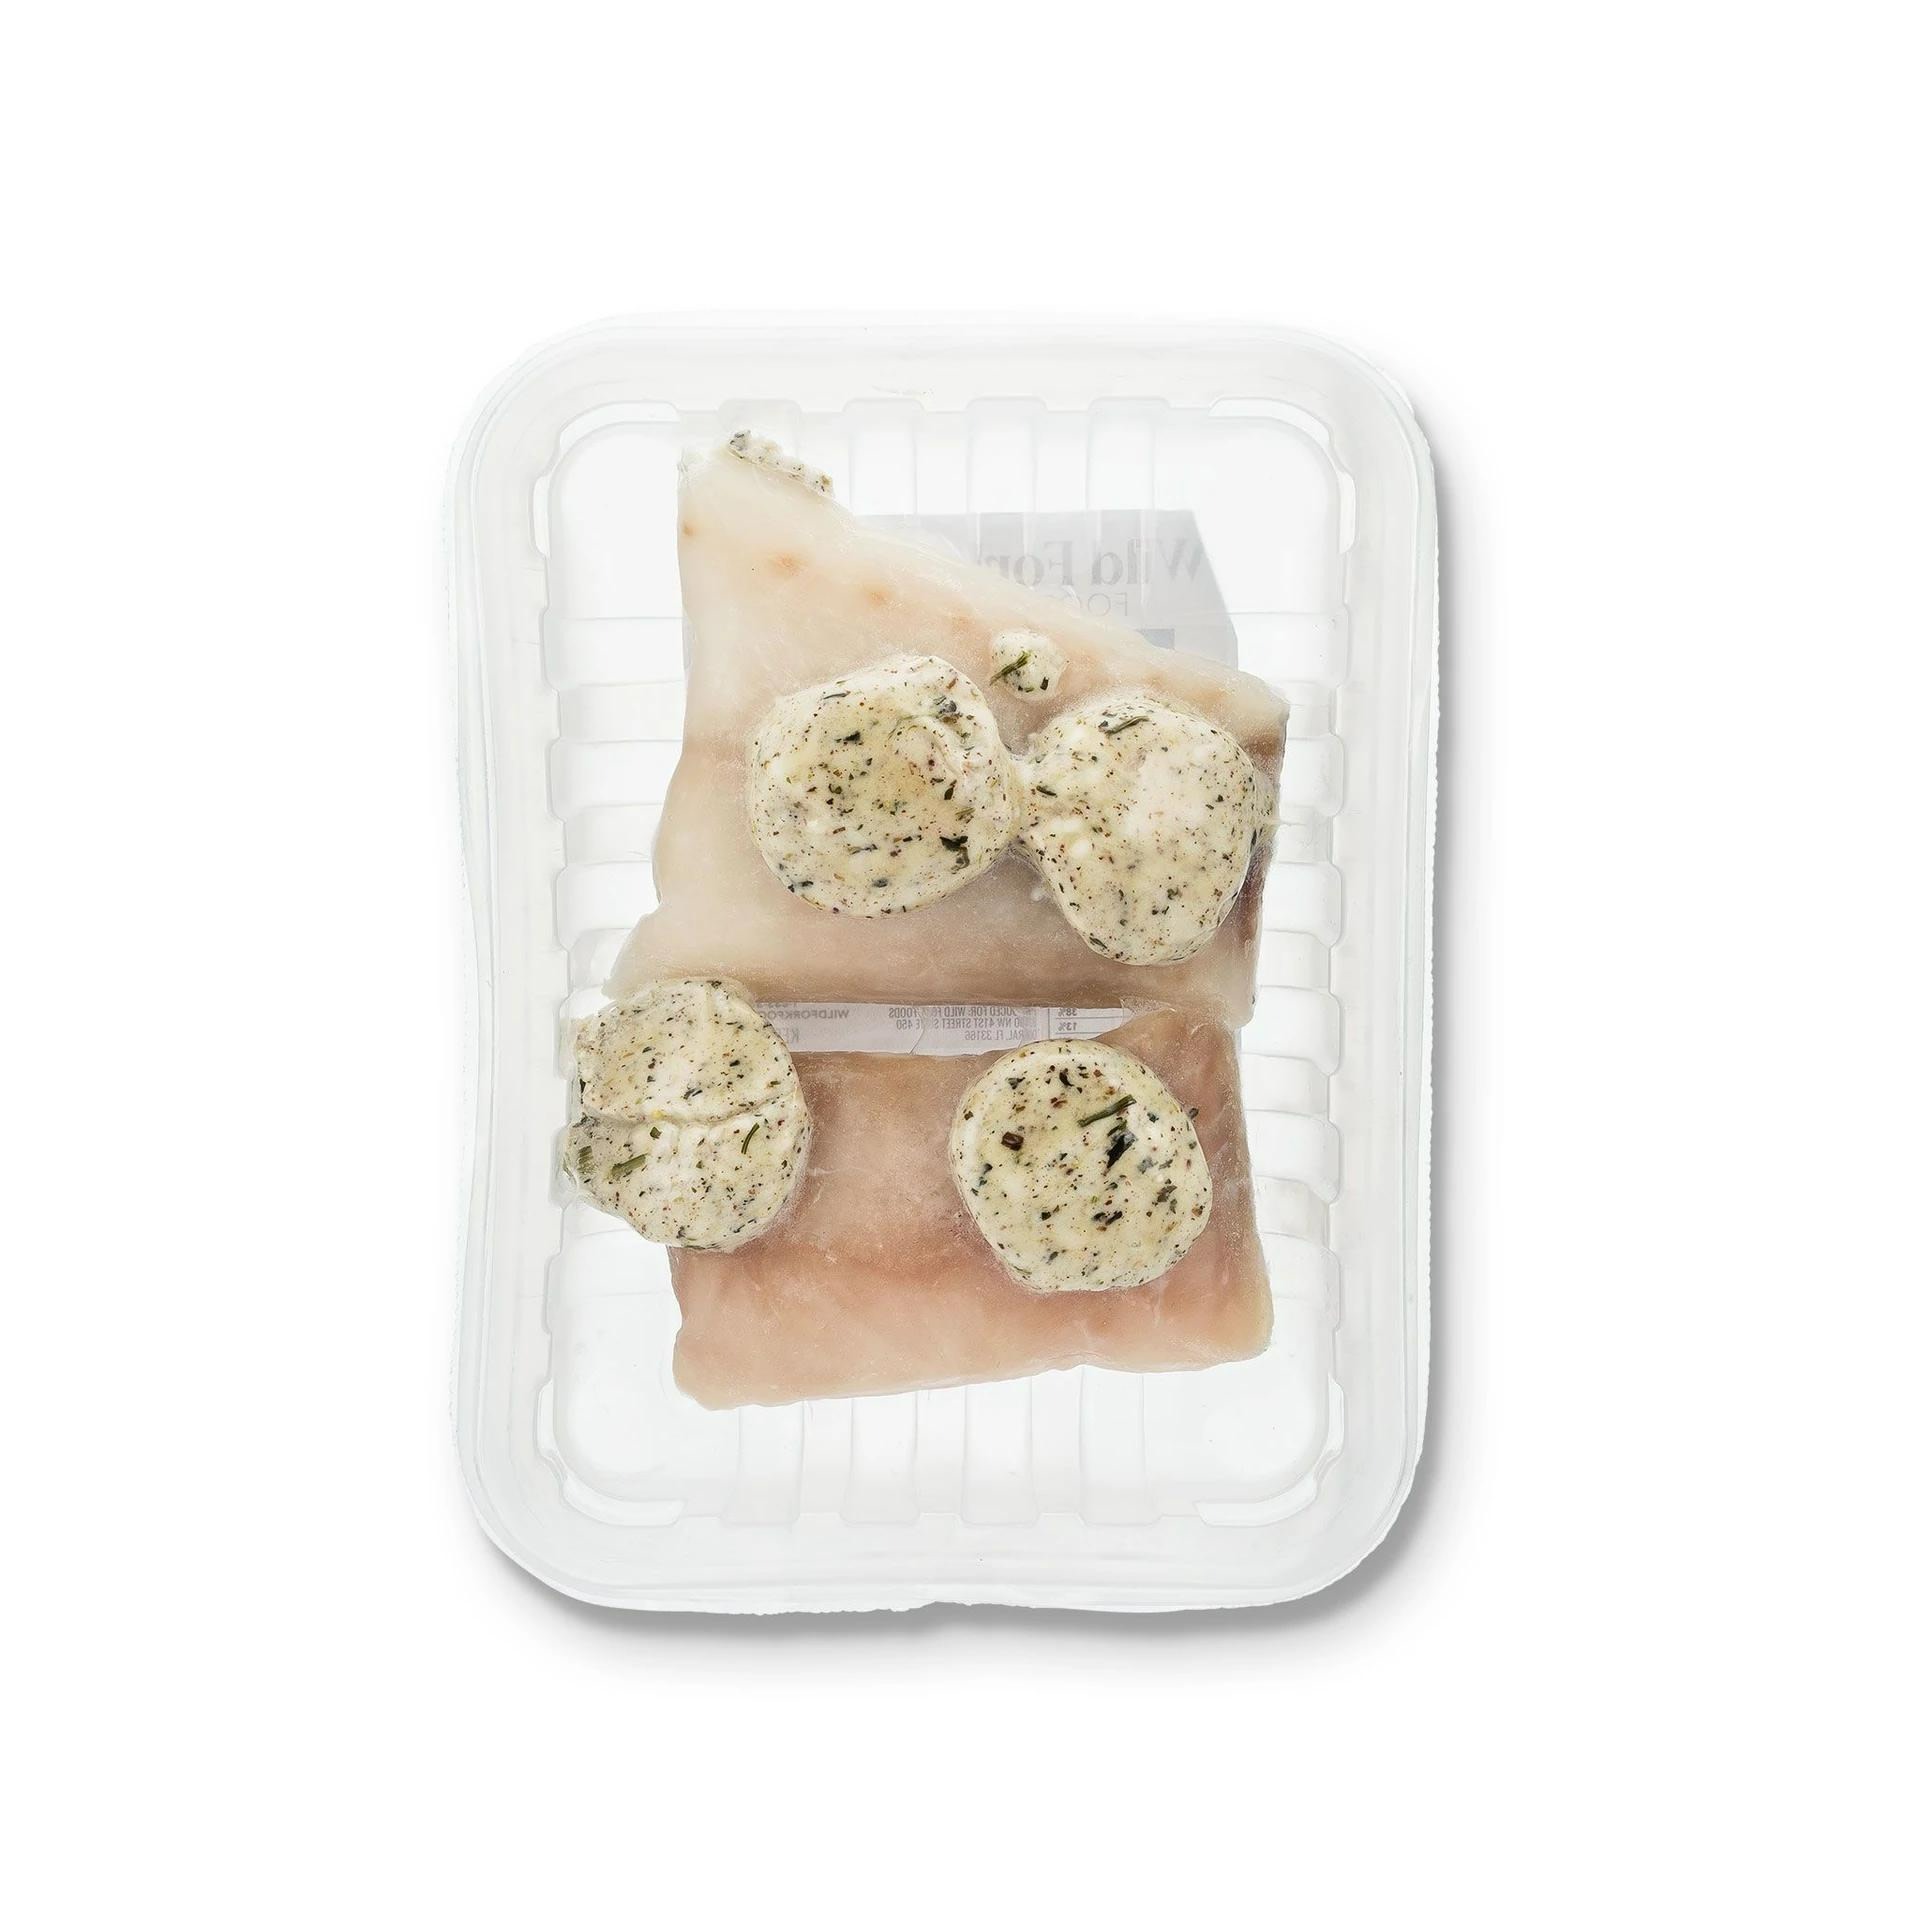 6086 WF PACKAGED SKIN-ON GOLDBAND SNAPPER WITH MEDITERRANEAN BUTTER SEAFOOD